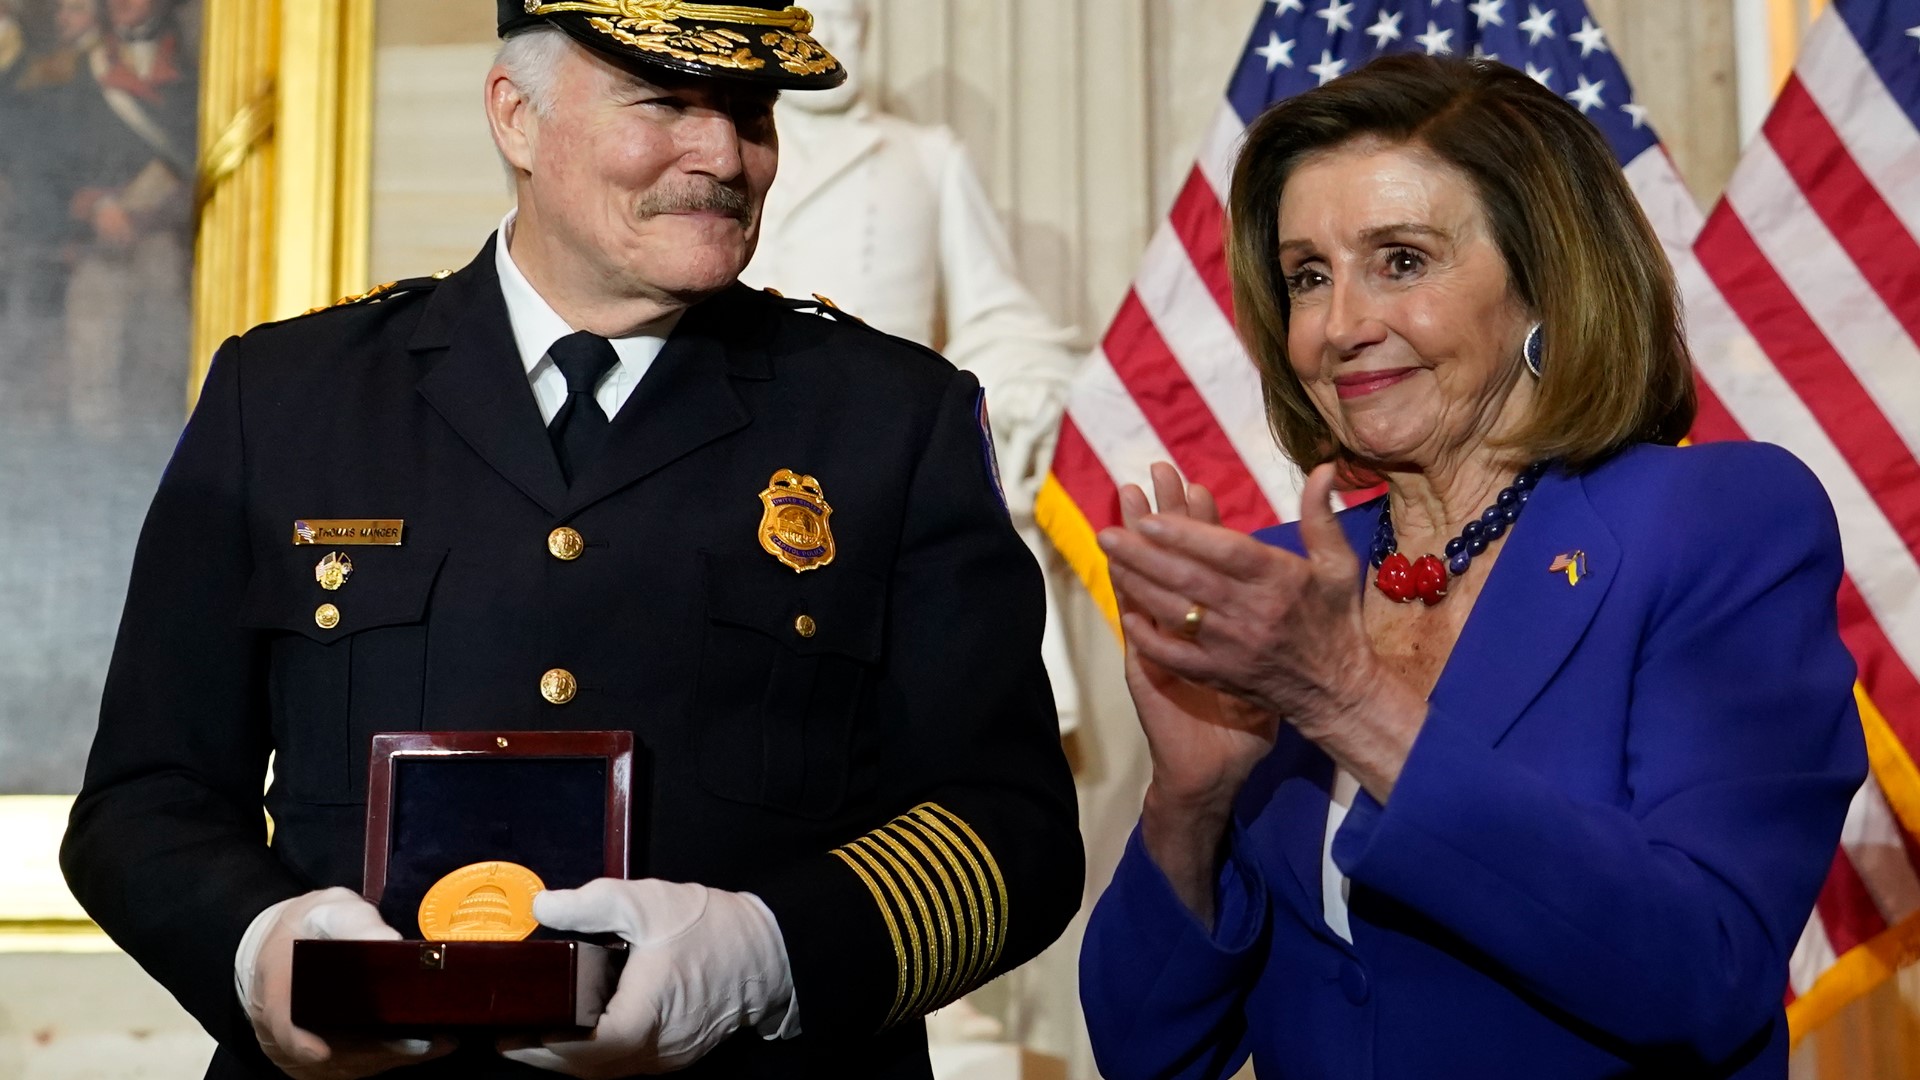 Awarding the medals will be among House Speaker Nancy Pelosi’s last ceremonial acts as she prepares to step down from leadership.